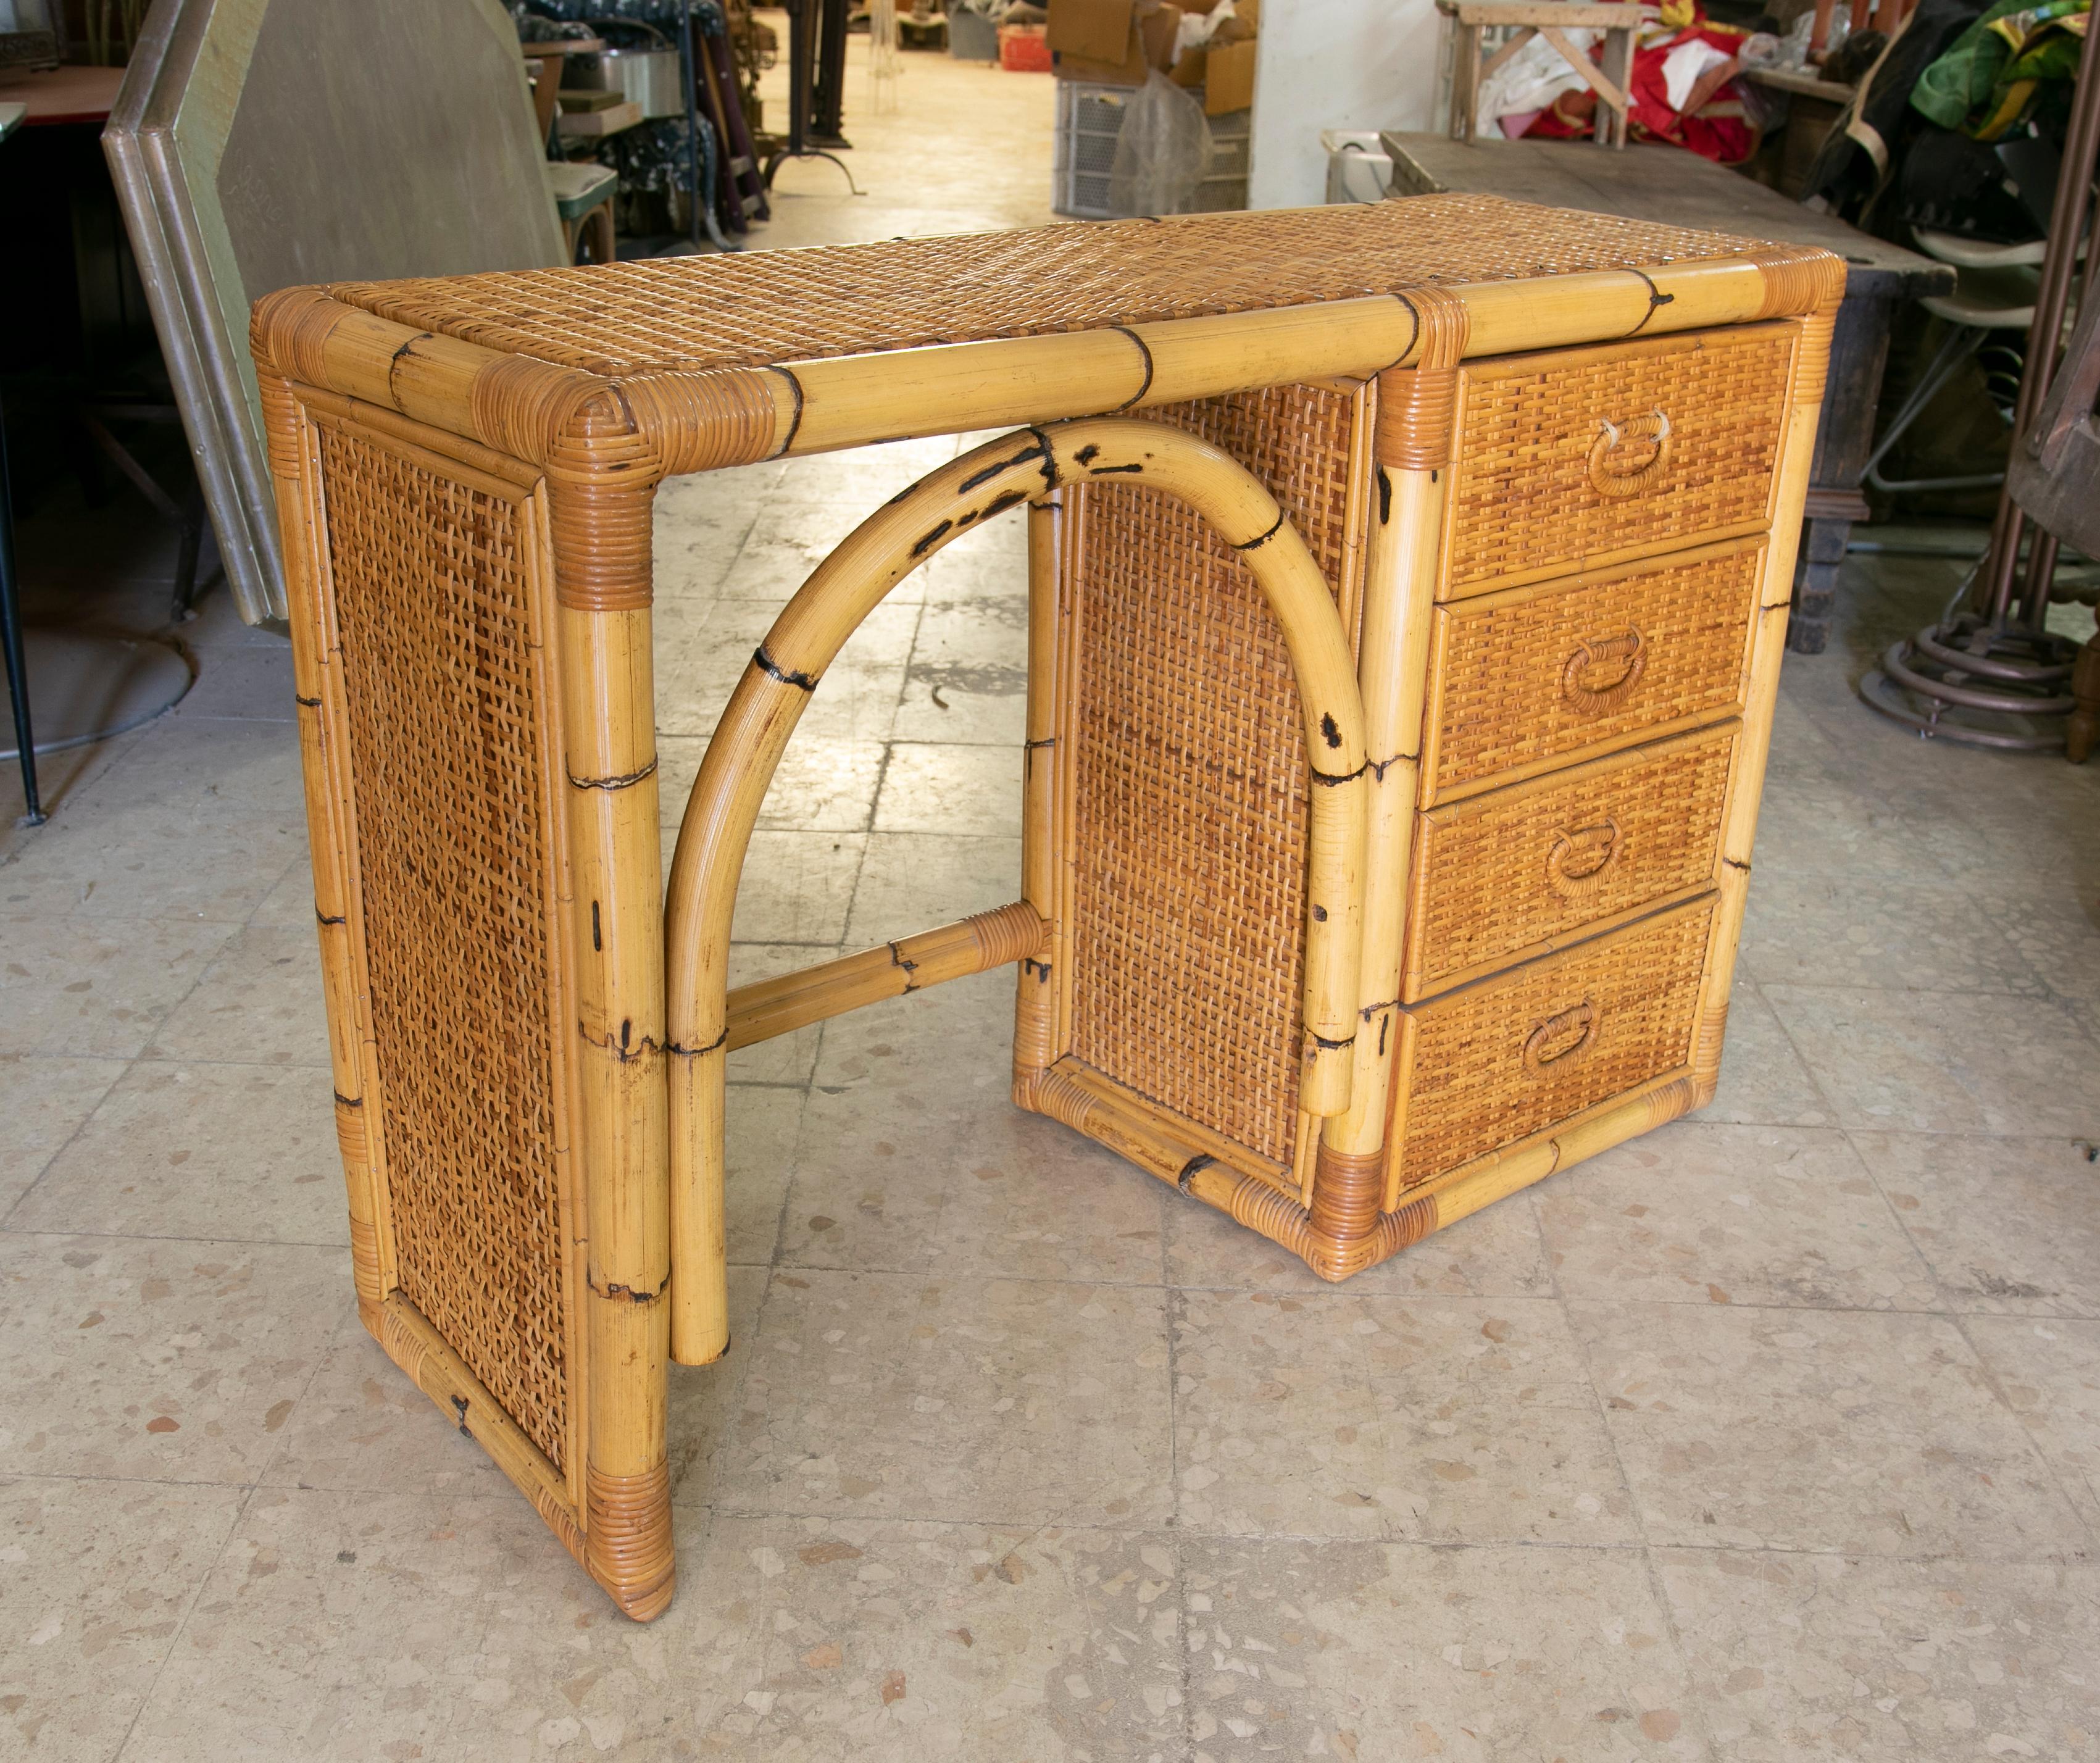 1970s Spanish desk made of bamboo and wicker with four drawers.